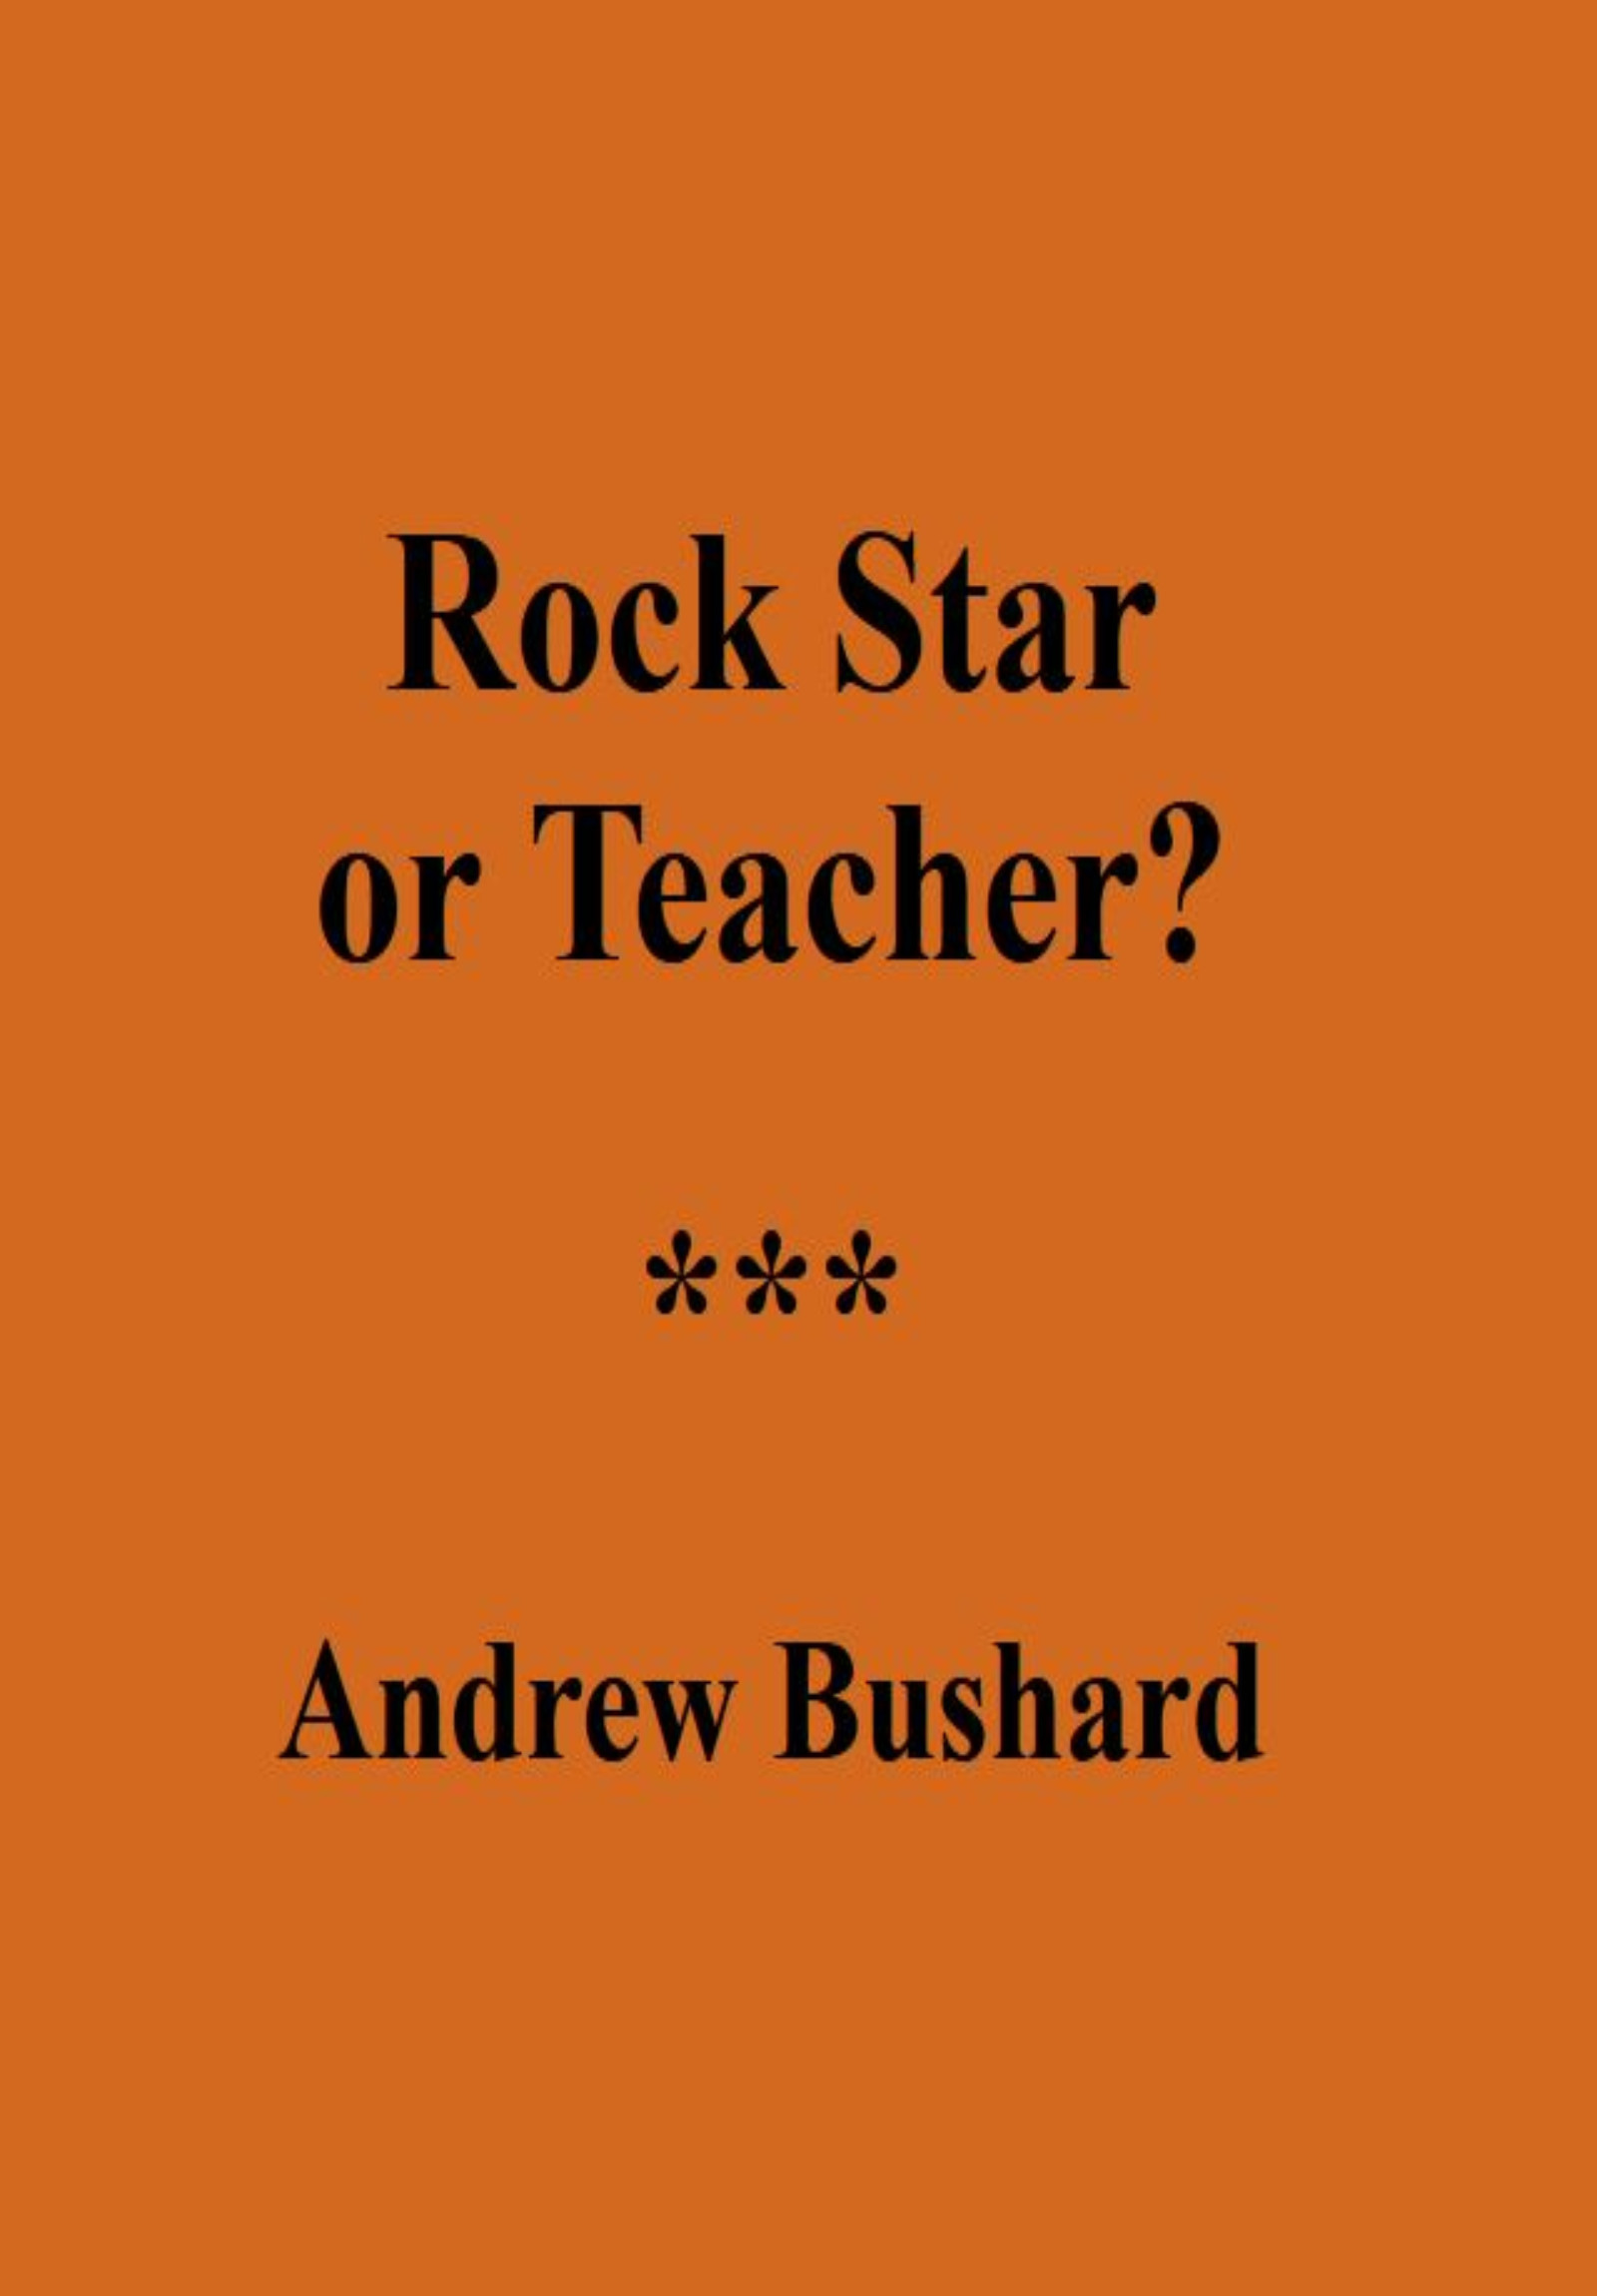 Rock Star or Teacher?'s featured image